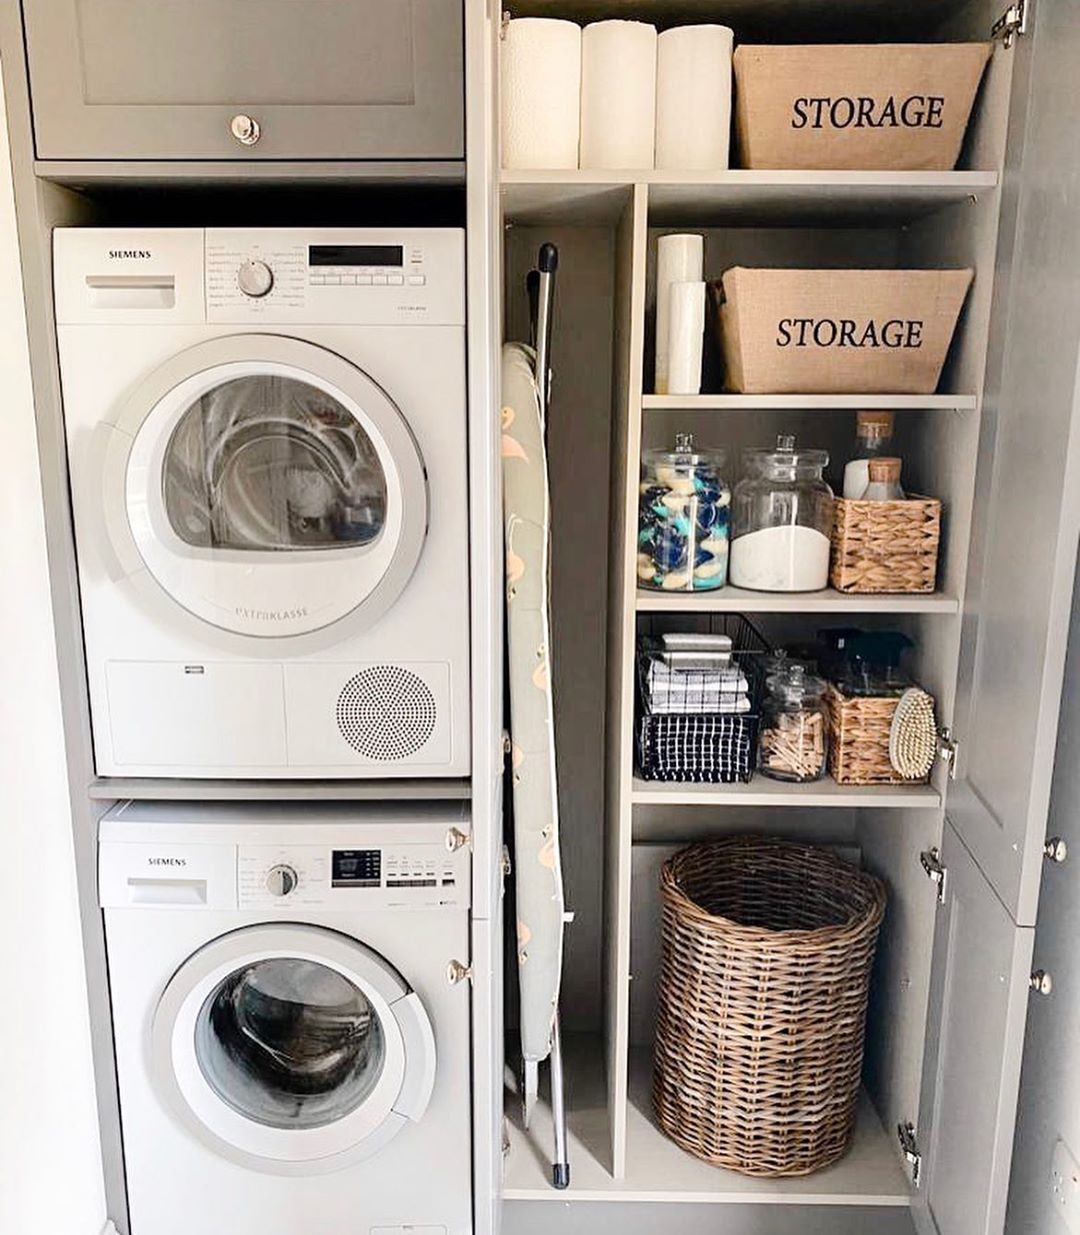 Laundry Closet Set up with Stacked Washer and Dryer. Photo by Instagram user @berkshire.build